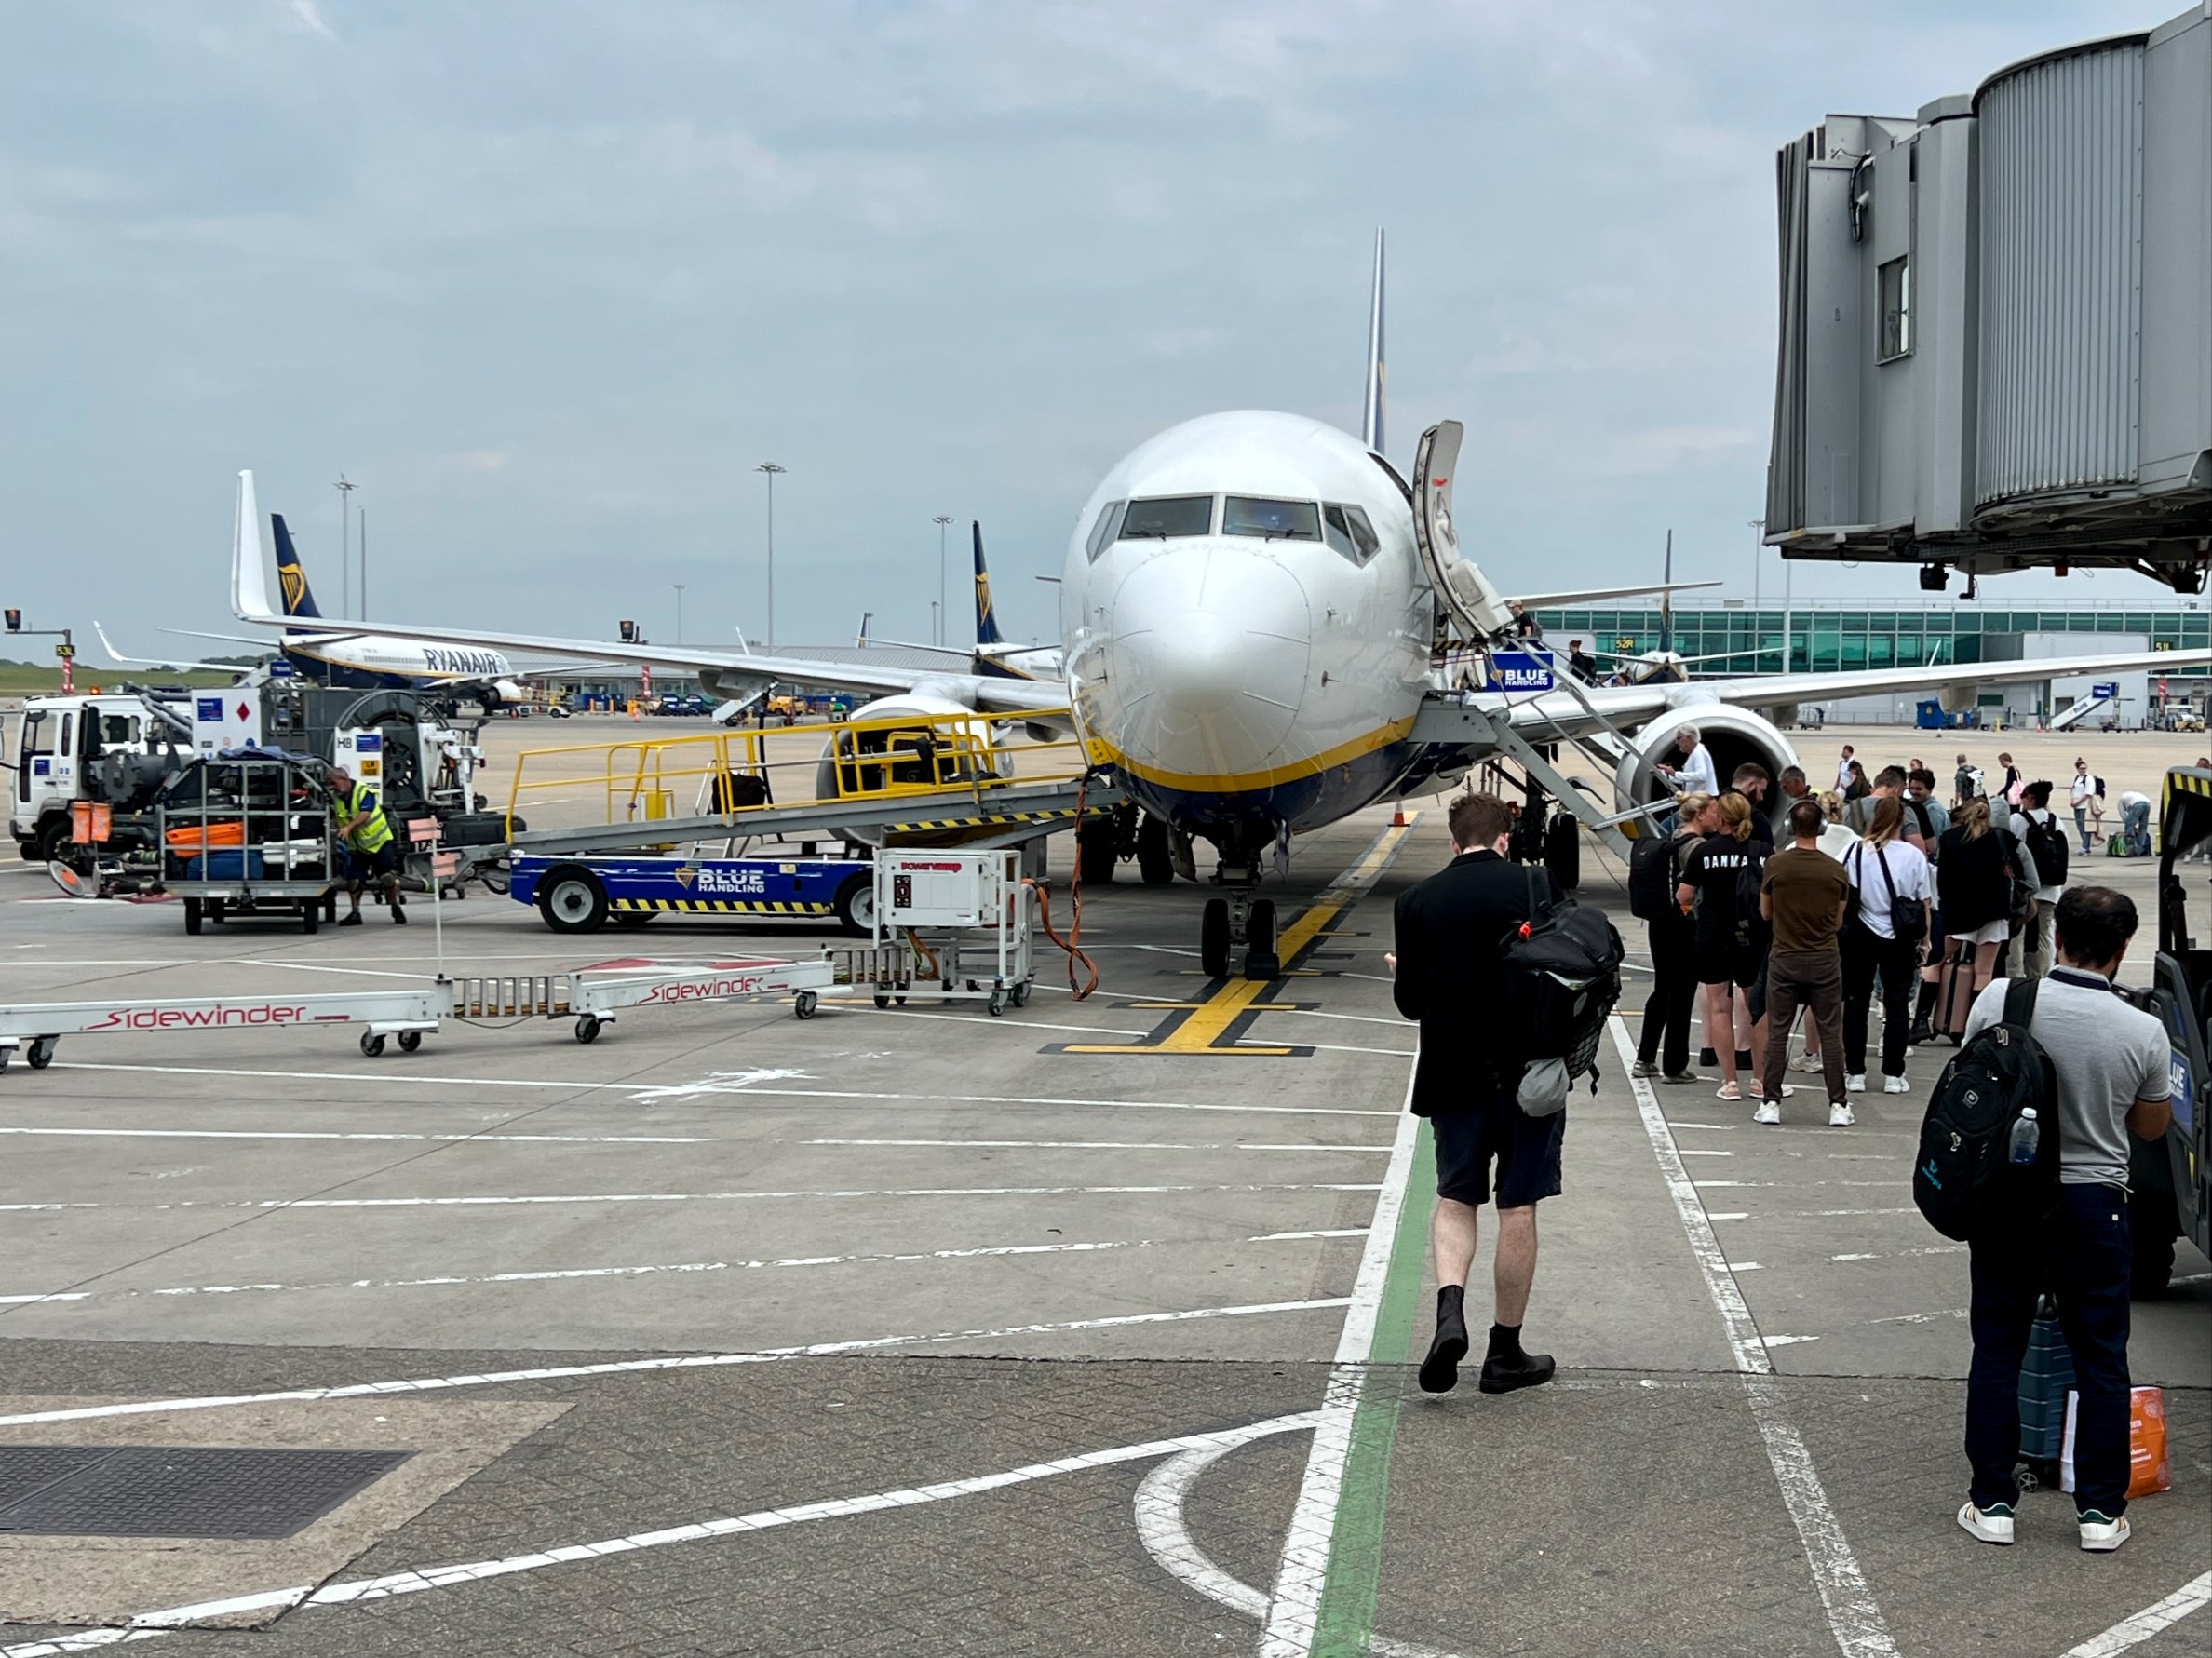 On the move: boarding a Ryanair plane at London Stansted airport